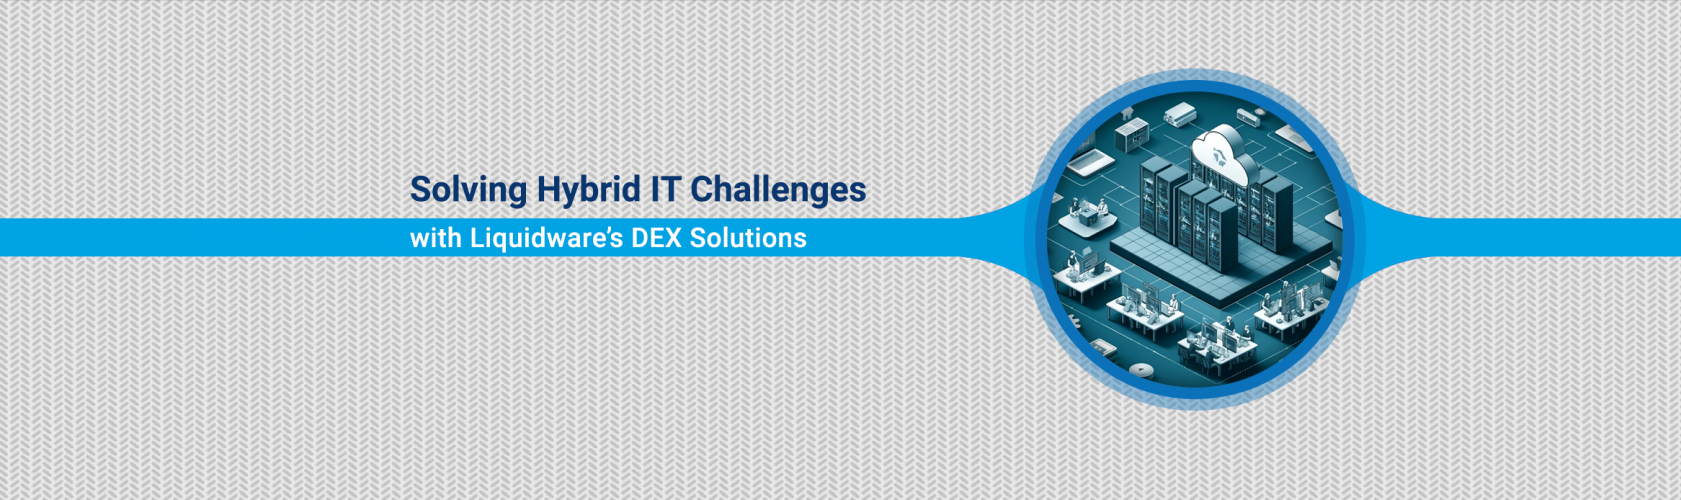 Blog — Solving Hybrid IT Challenges with Liquidware’s DEX Solutions